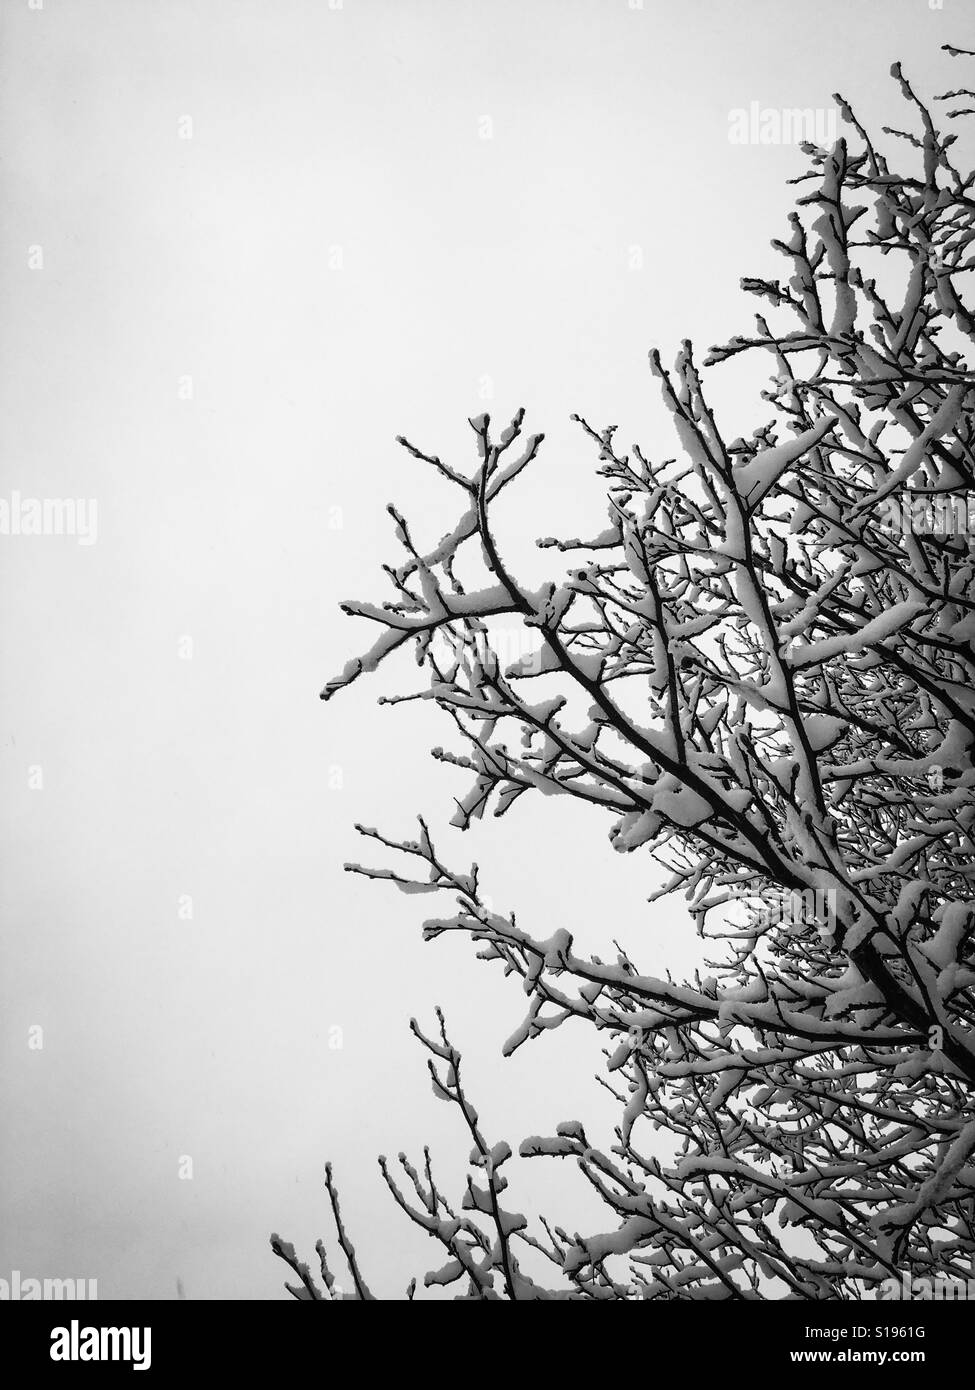 Snow on a tree against a white sky. Stock Photo